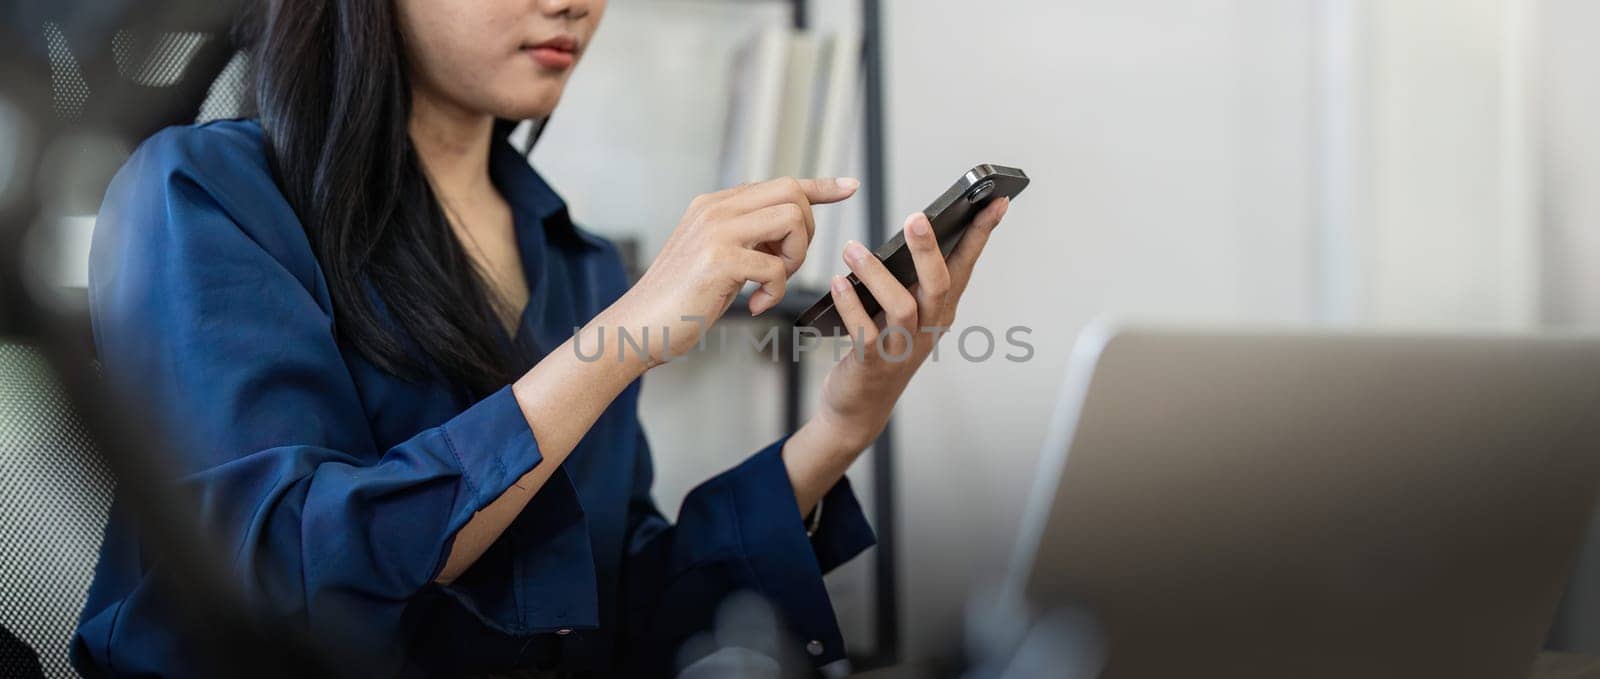 Young business woman on the phone at office. Business woman texting on the phone and working on laptop. Pretty young business woman sitting on workplace.